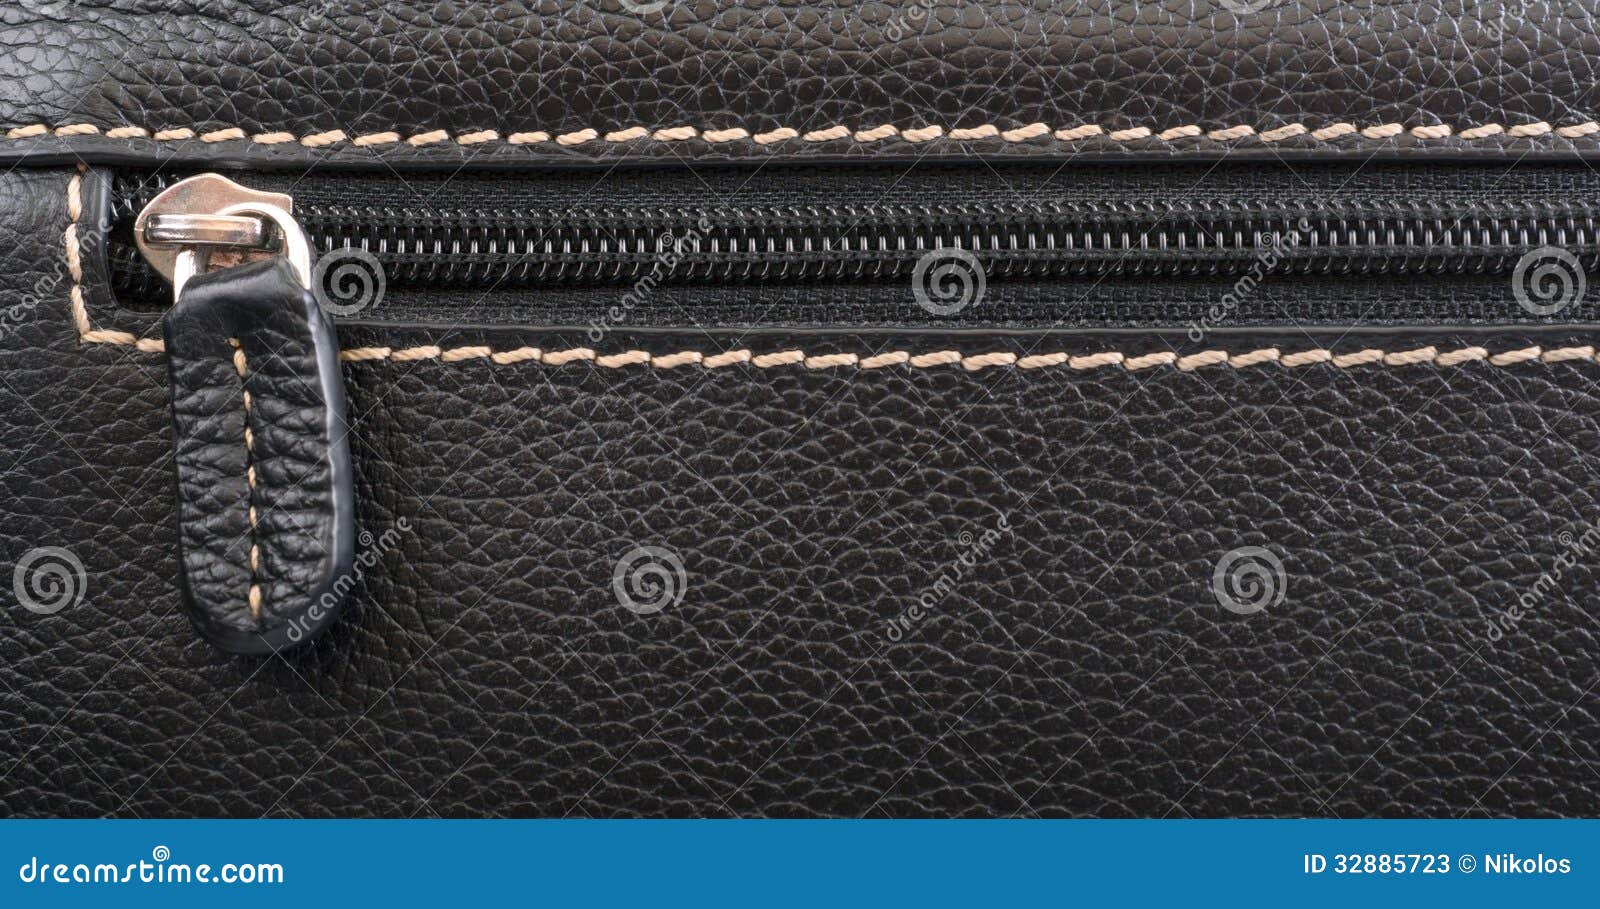 Dark brown leather texture stock image. Image of natural - 32885723